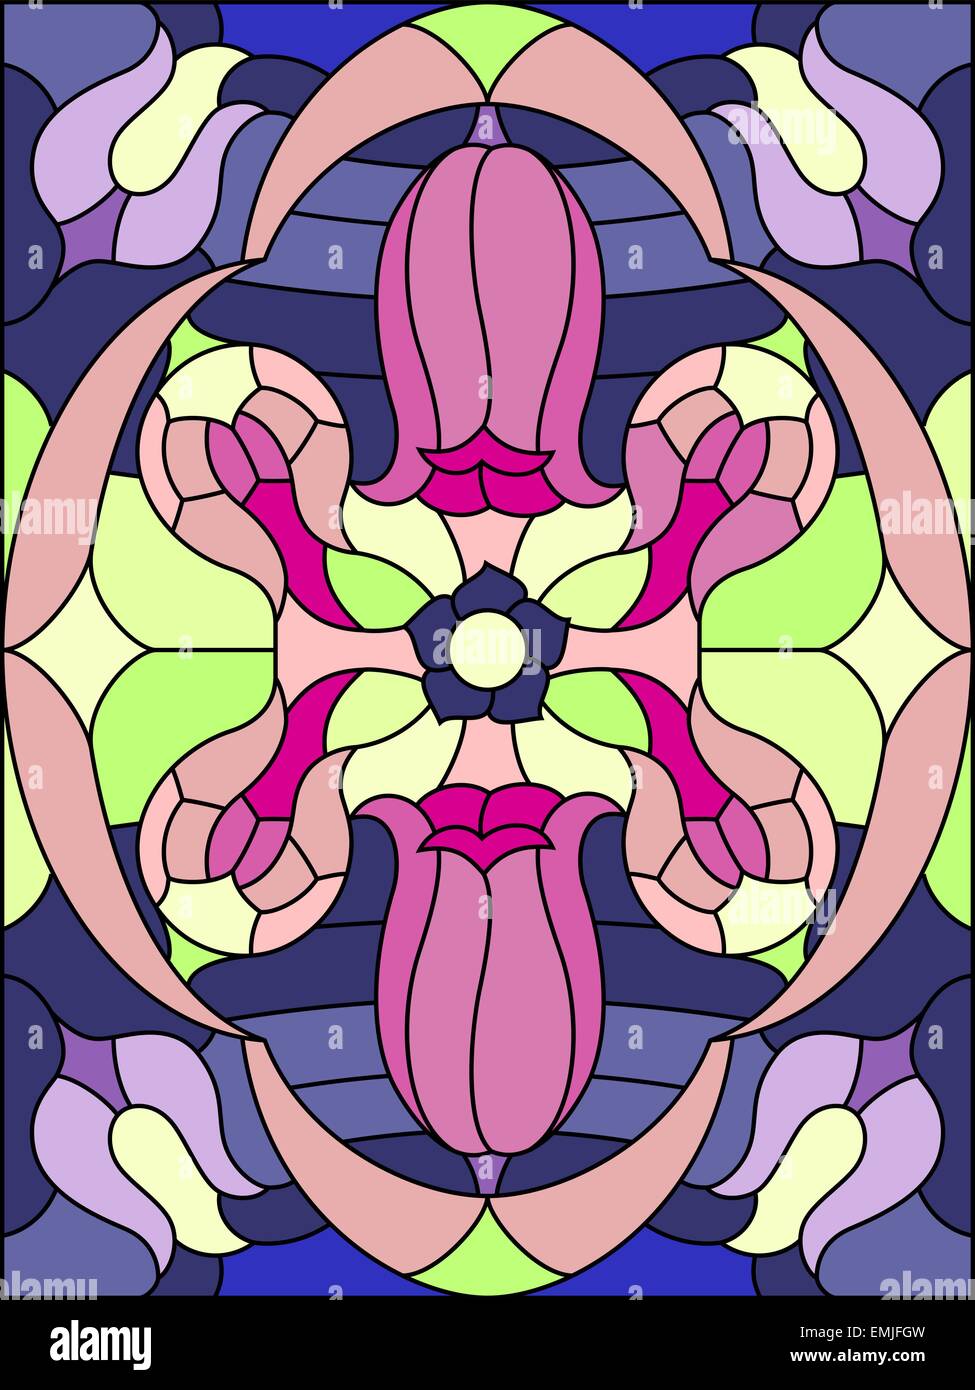 Flowers composition. Floral pattern for stained glass window. Stock Vector